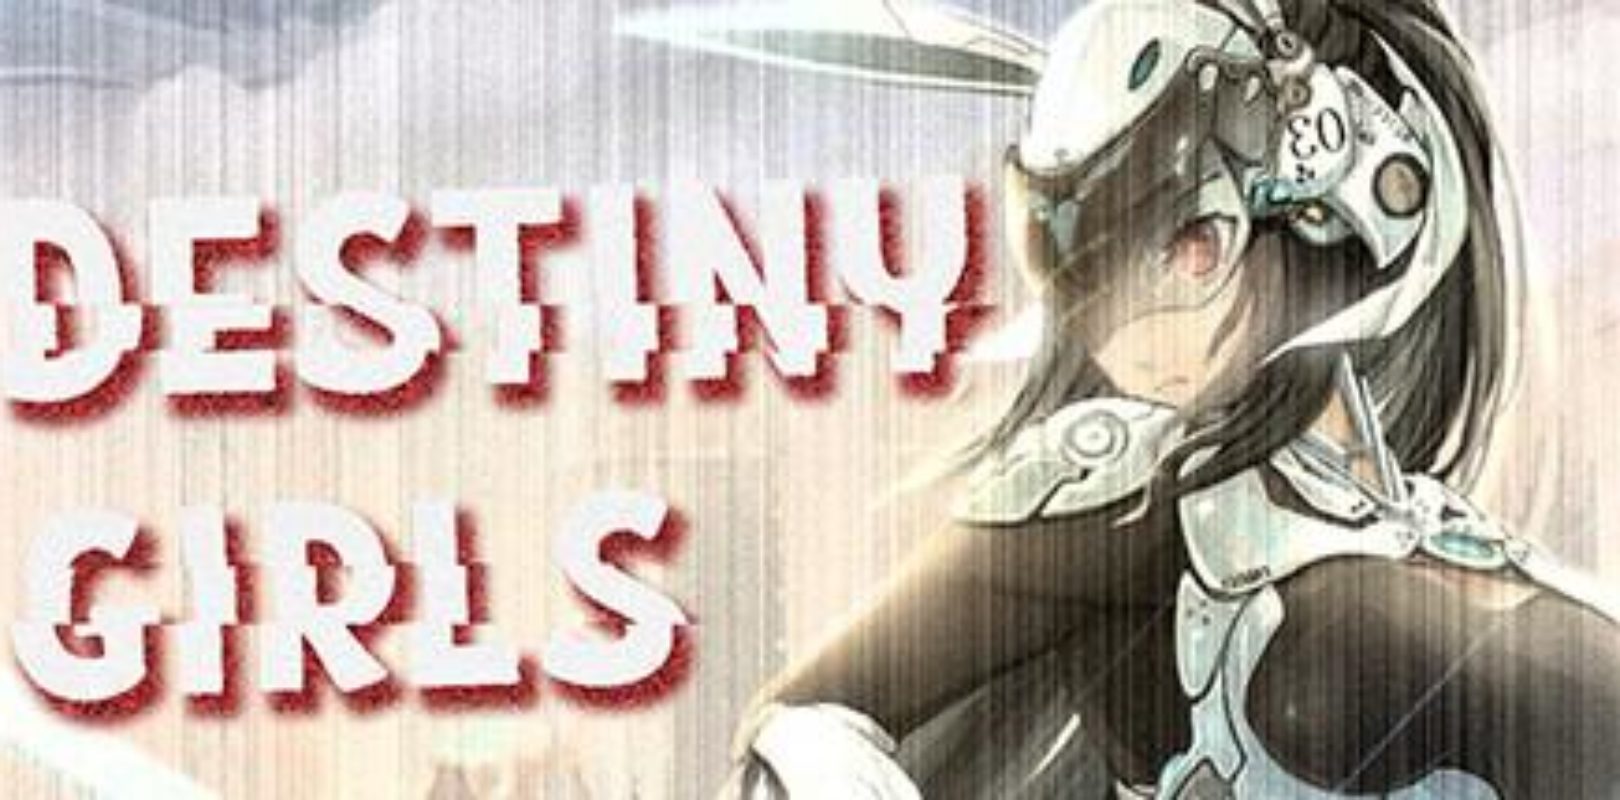 Destiny Girls Steam Keys Giveaway Ended Pivotal Gamers - roblox free girl account giveaway 2019